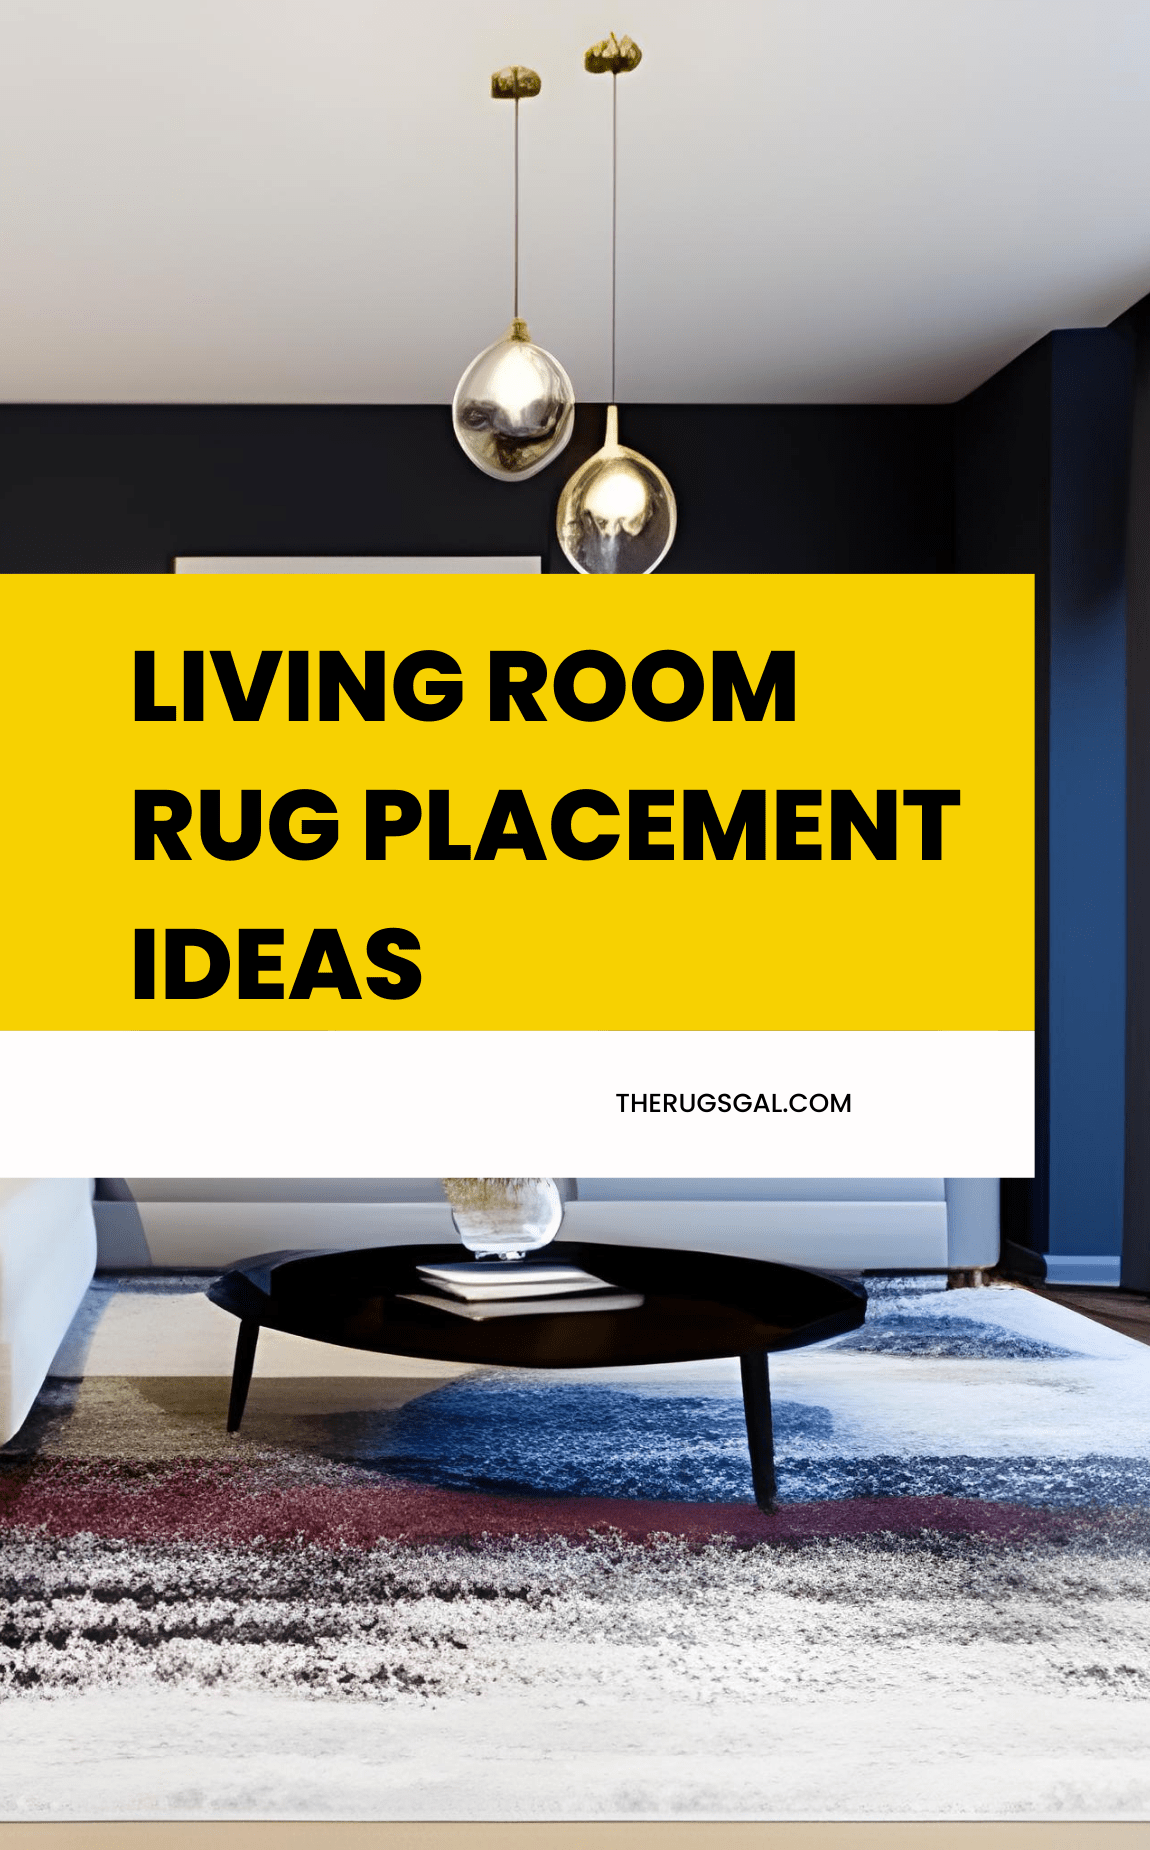 Living Room Rug Placement Ideas